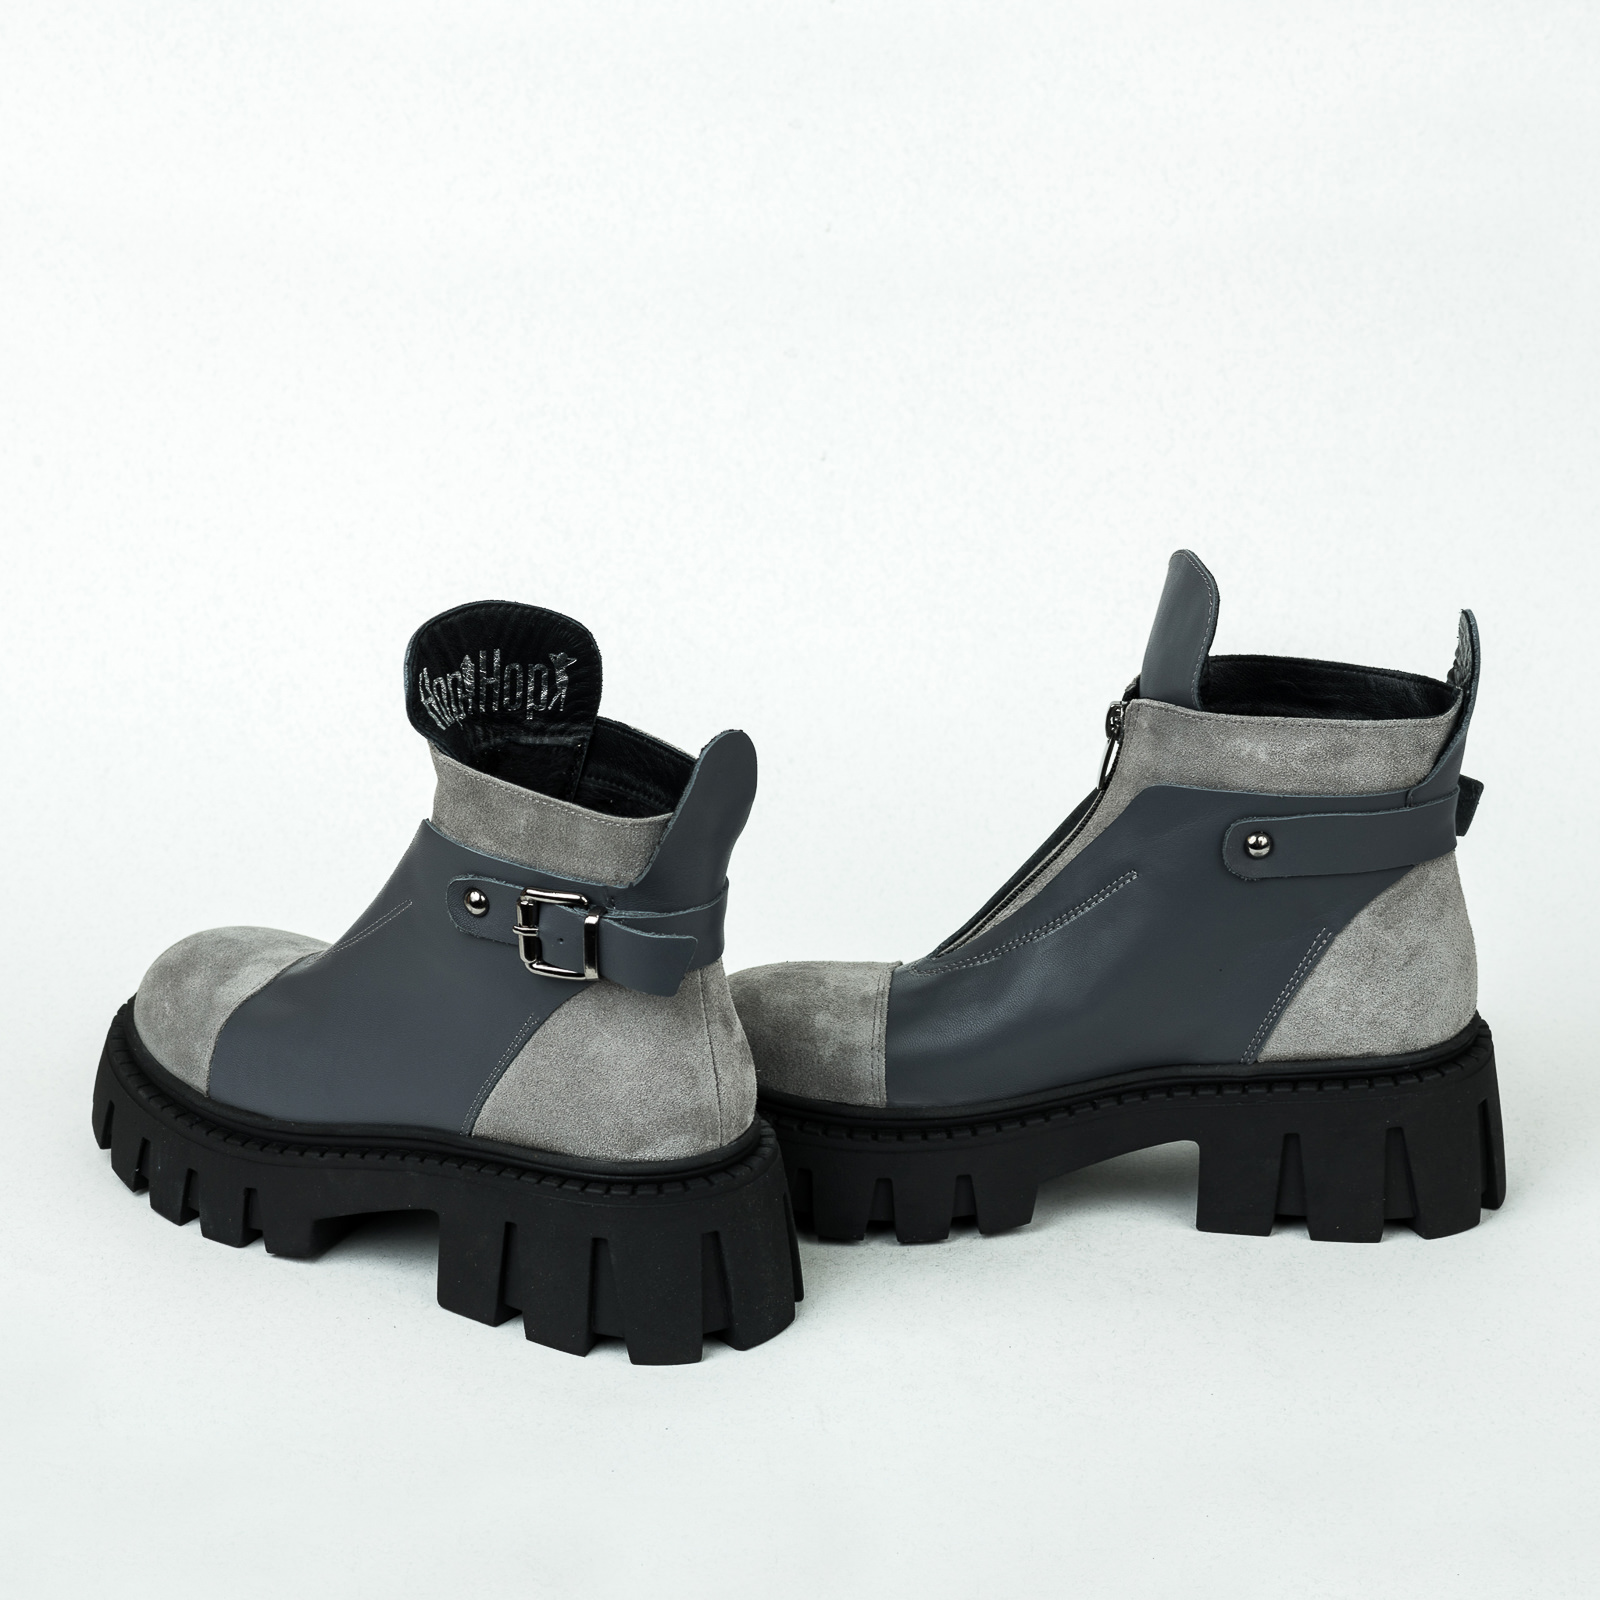 Leather booties B246 - GREY